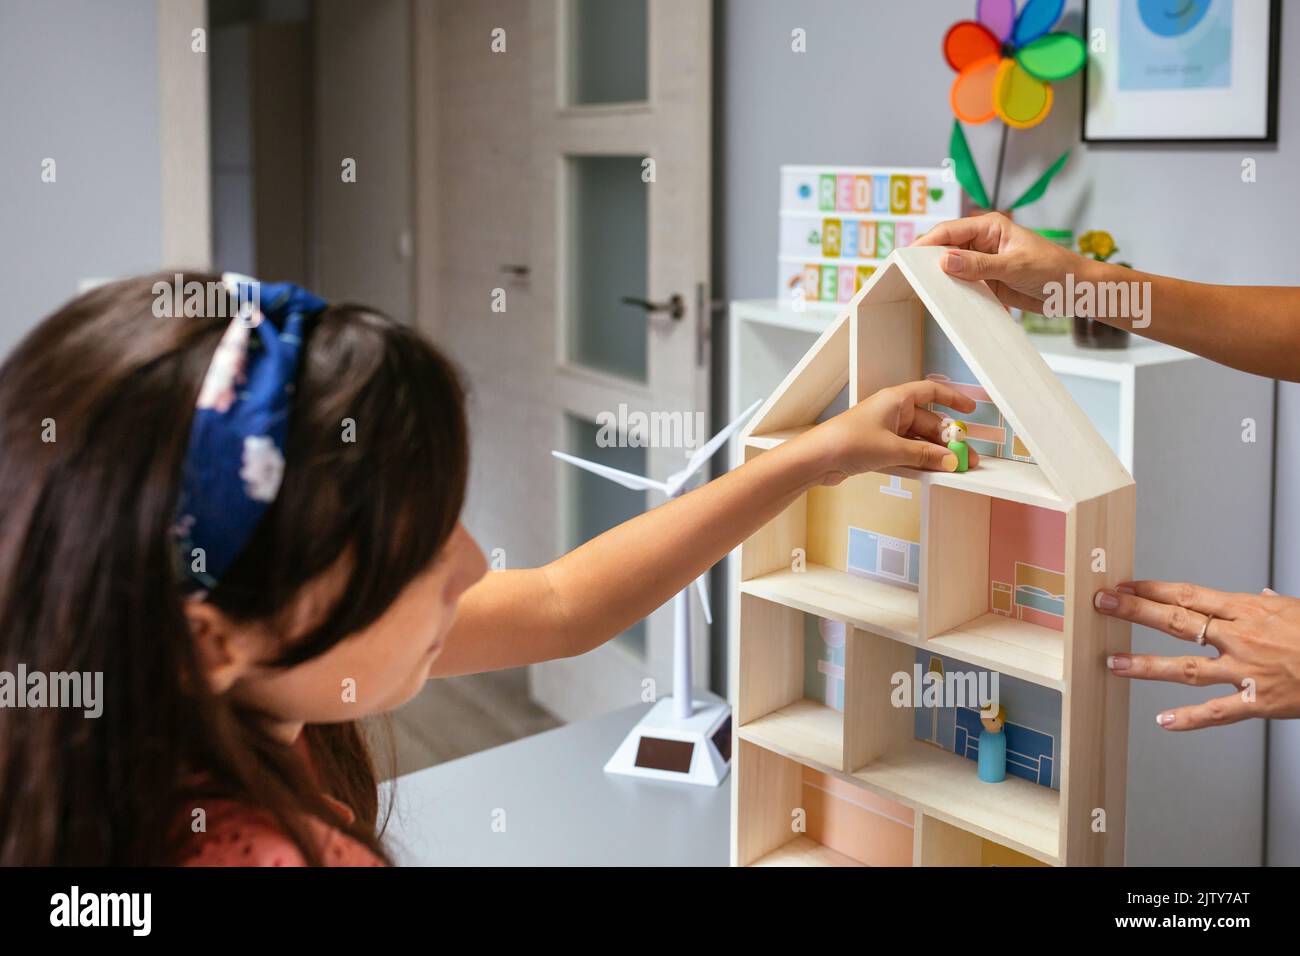 Student in an ecology classroom placing dolls in a house Stock Photo